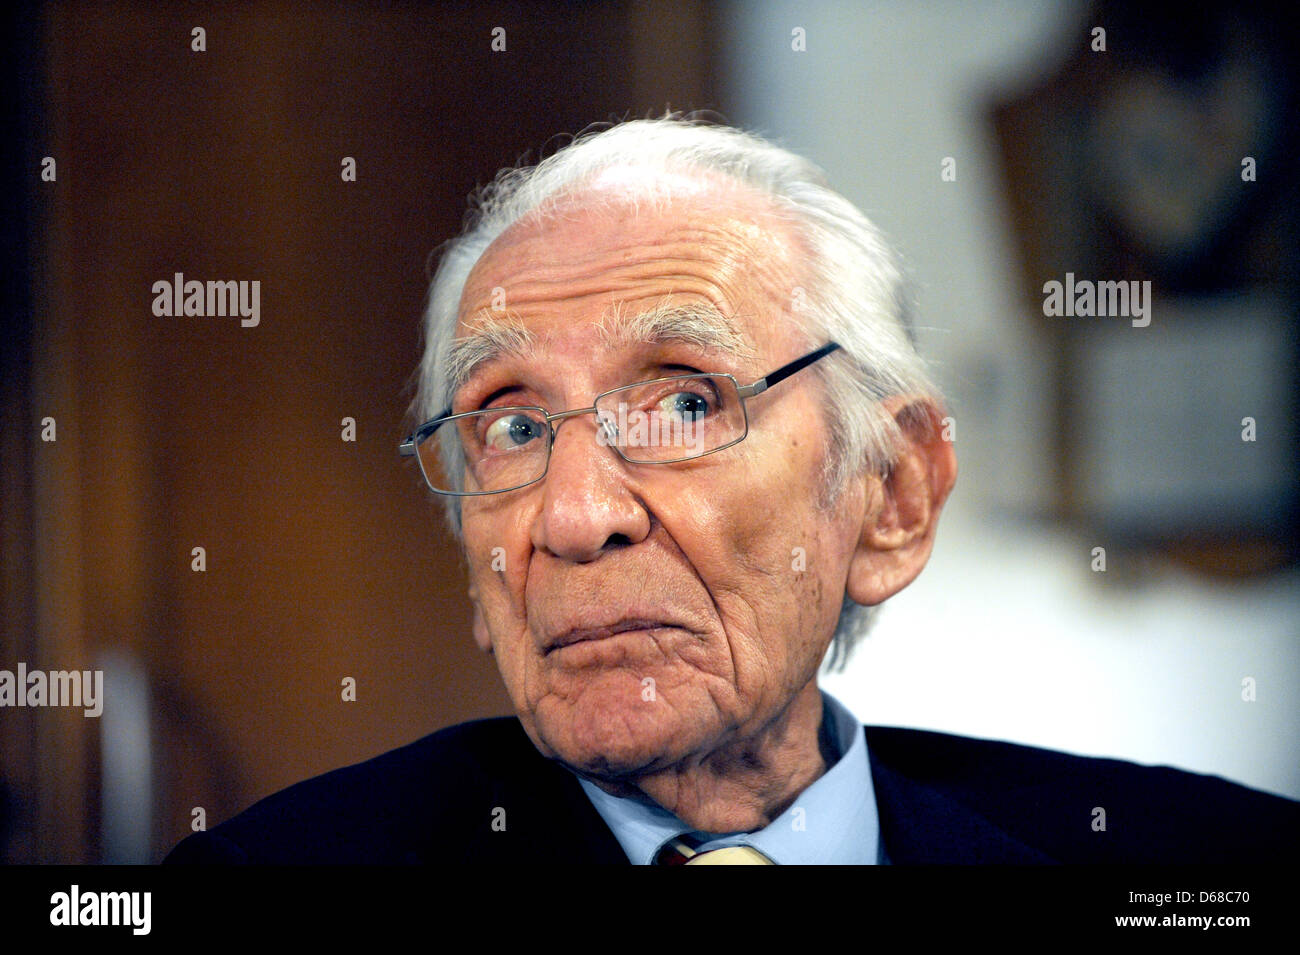 Swiss actor Lukas Ammann gives an interview in Baden-Baden, Germany, 10 July 2012. Ammann will celebrate his 100th birthday in 2012. Between 1994 and 2000 he portrayed the pater familias Franz Faller in the SWR television series 'Die Fallers'. Photo: Patrick Seeger Stock Photo